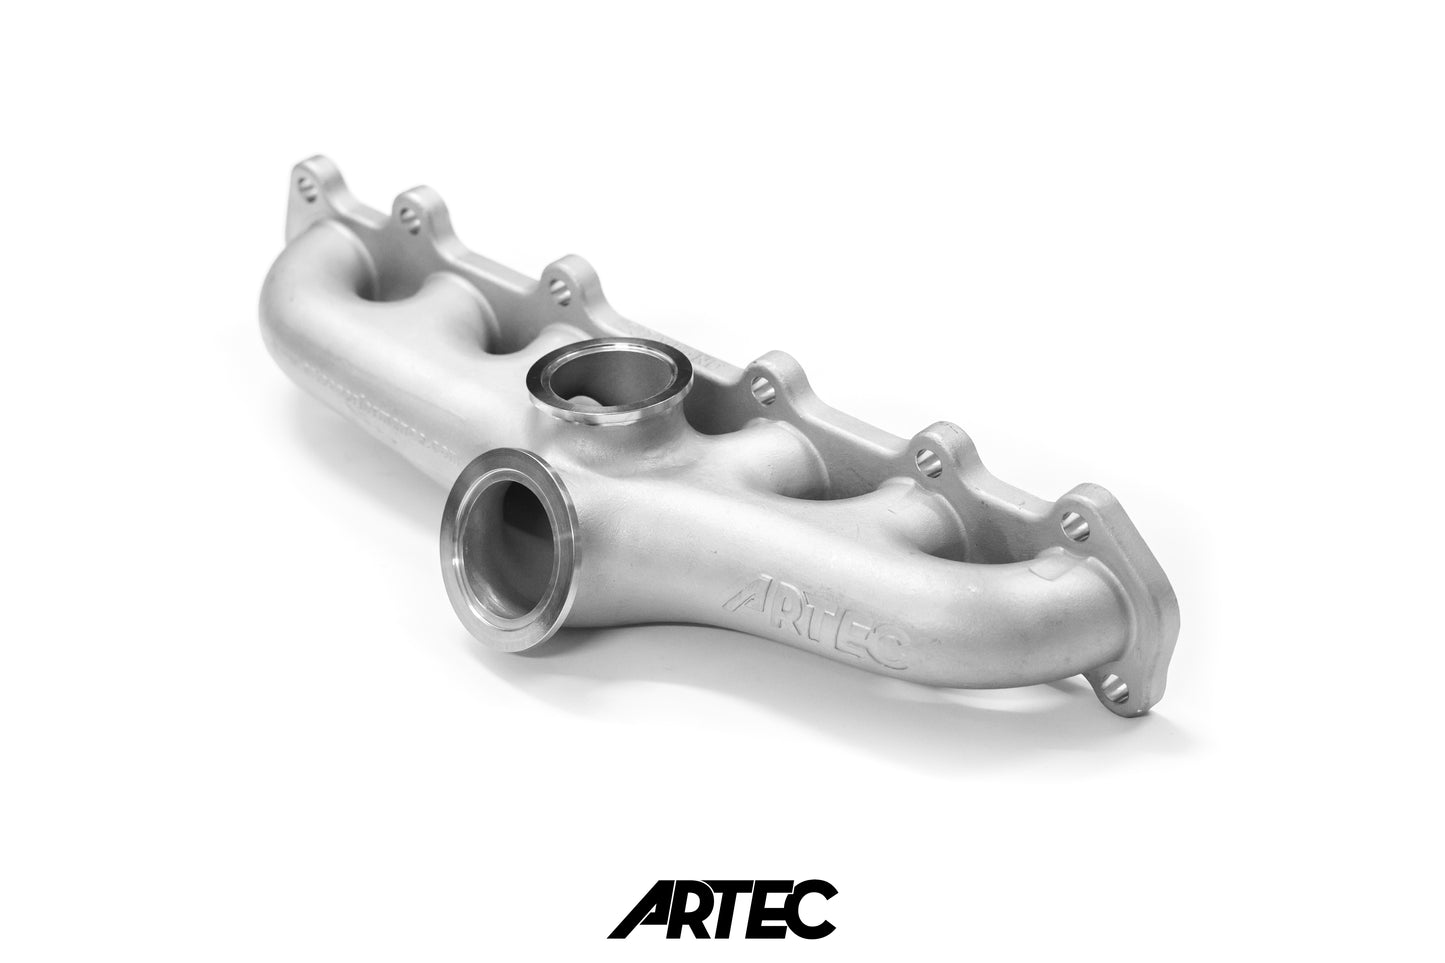 Artec Toyota 2JZ GTE V-band (Compact) Turbo Exhaust Manifold